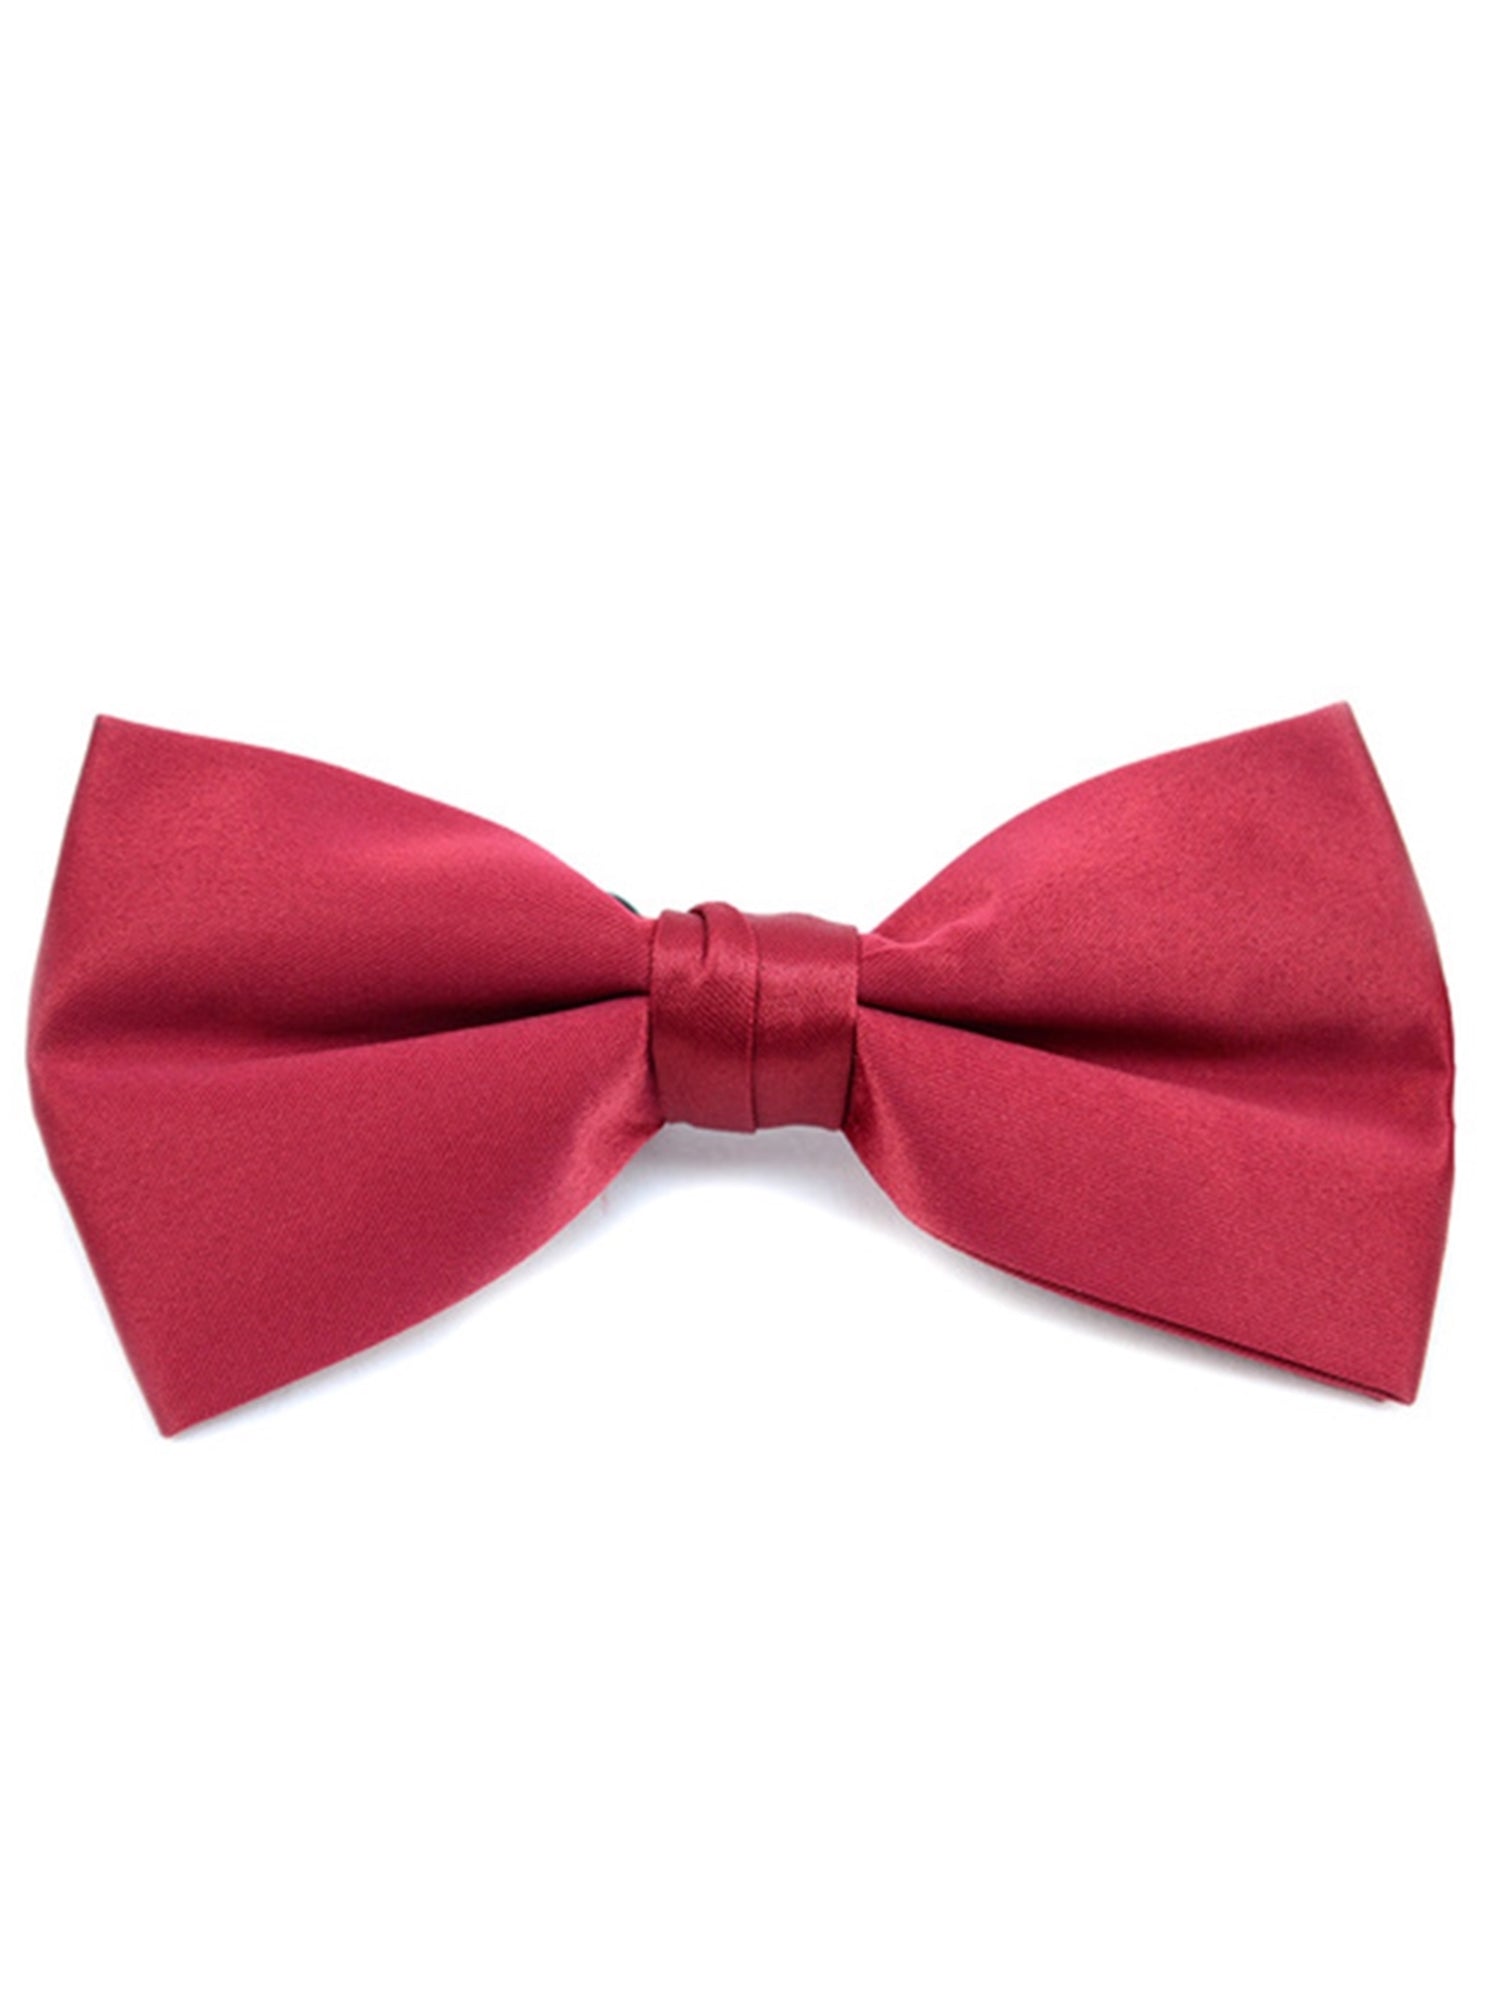 Young Boy's Pre-tied Adjustable Length Bow Tie - Formal Tuxedo Solid Color Boy's Solid Color Bow Tie TheDapperTie Burgundy One Size 